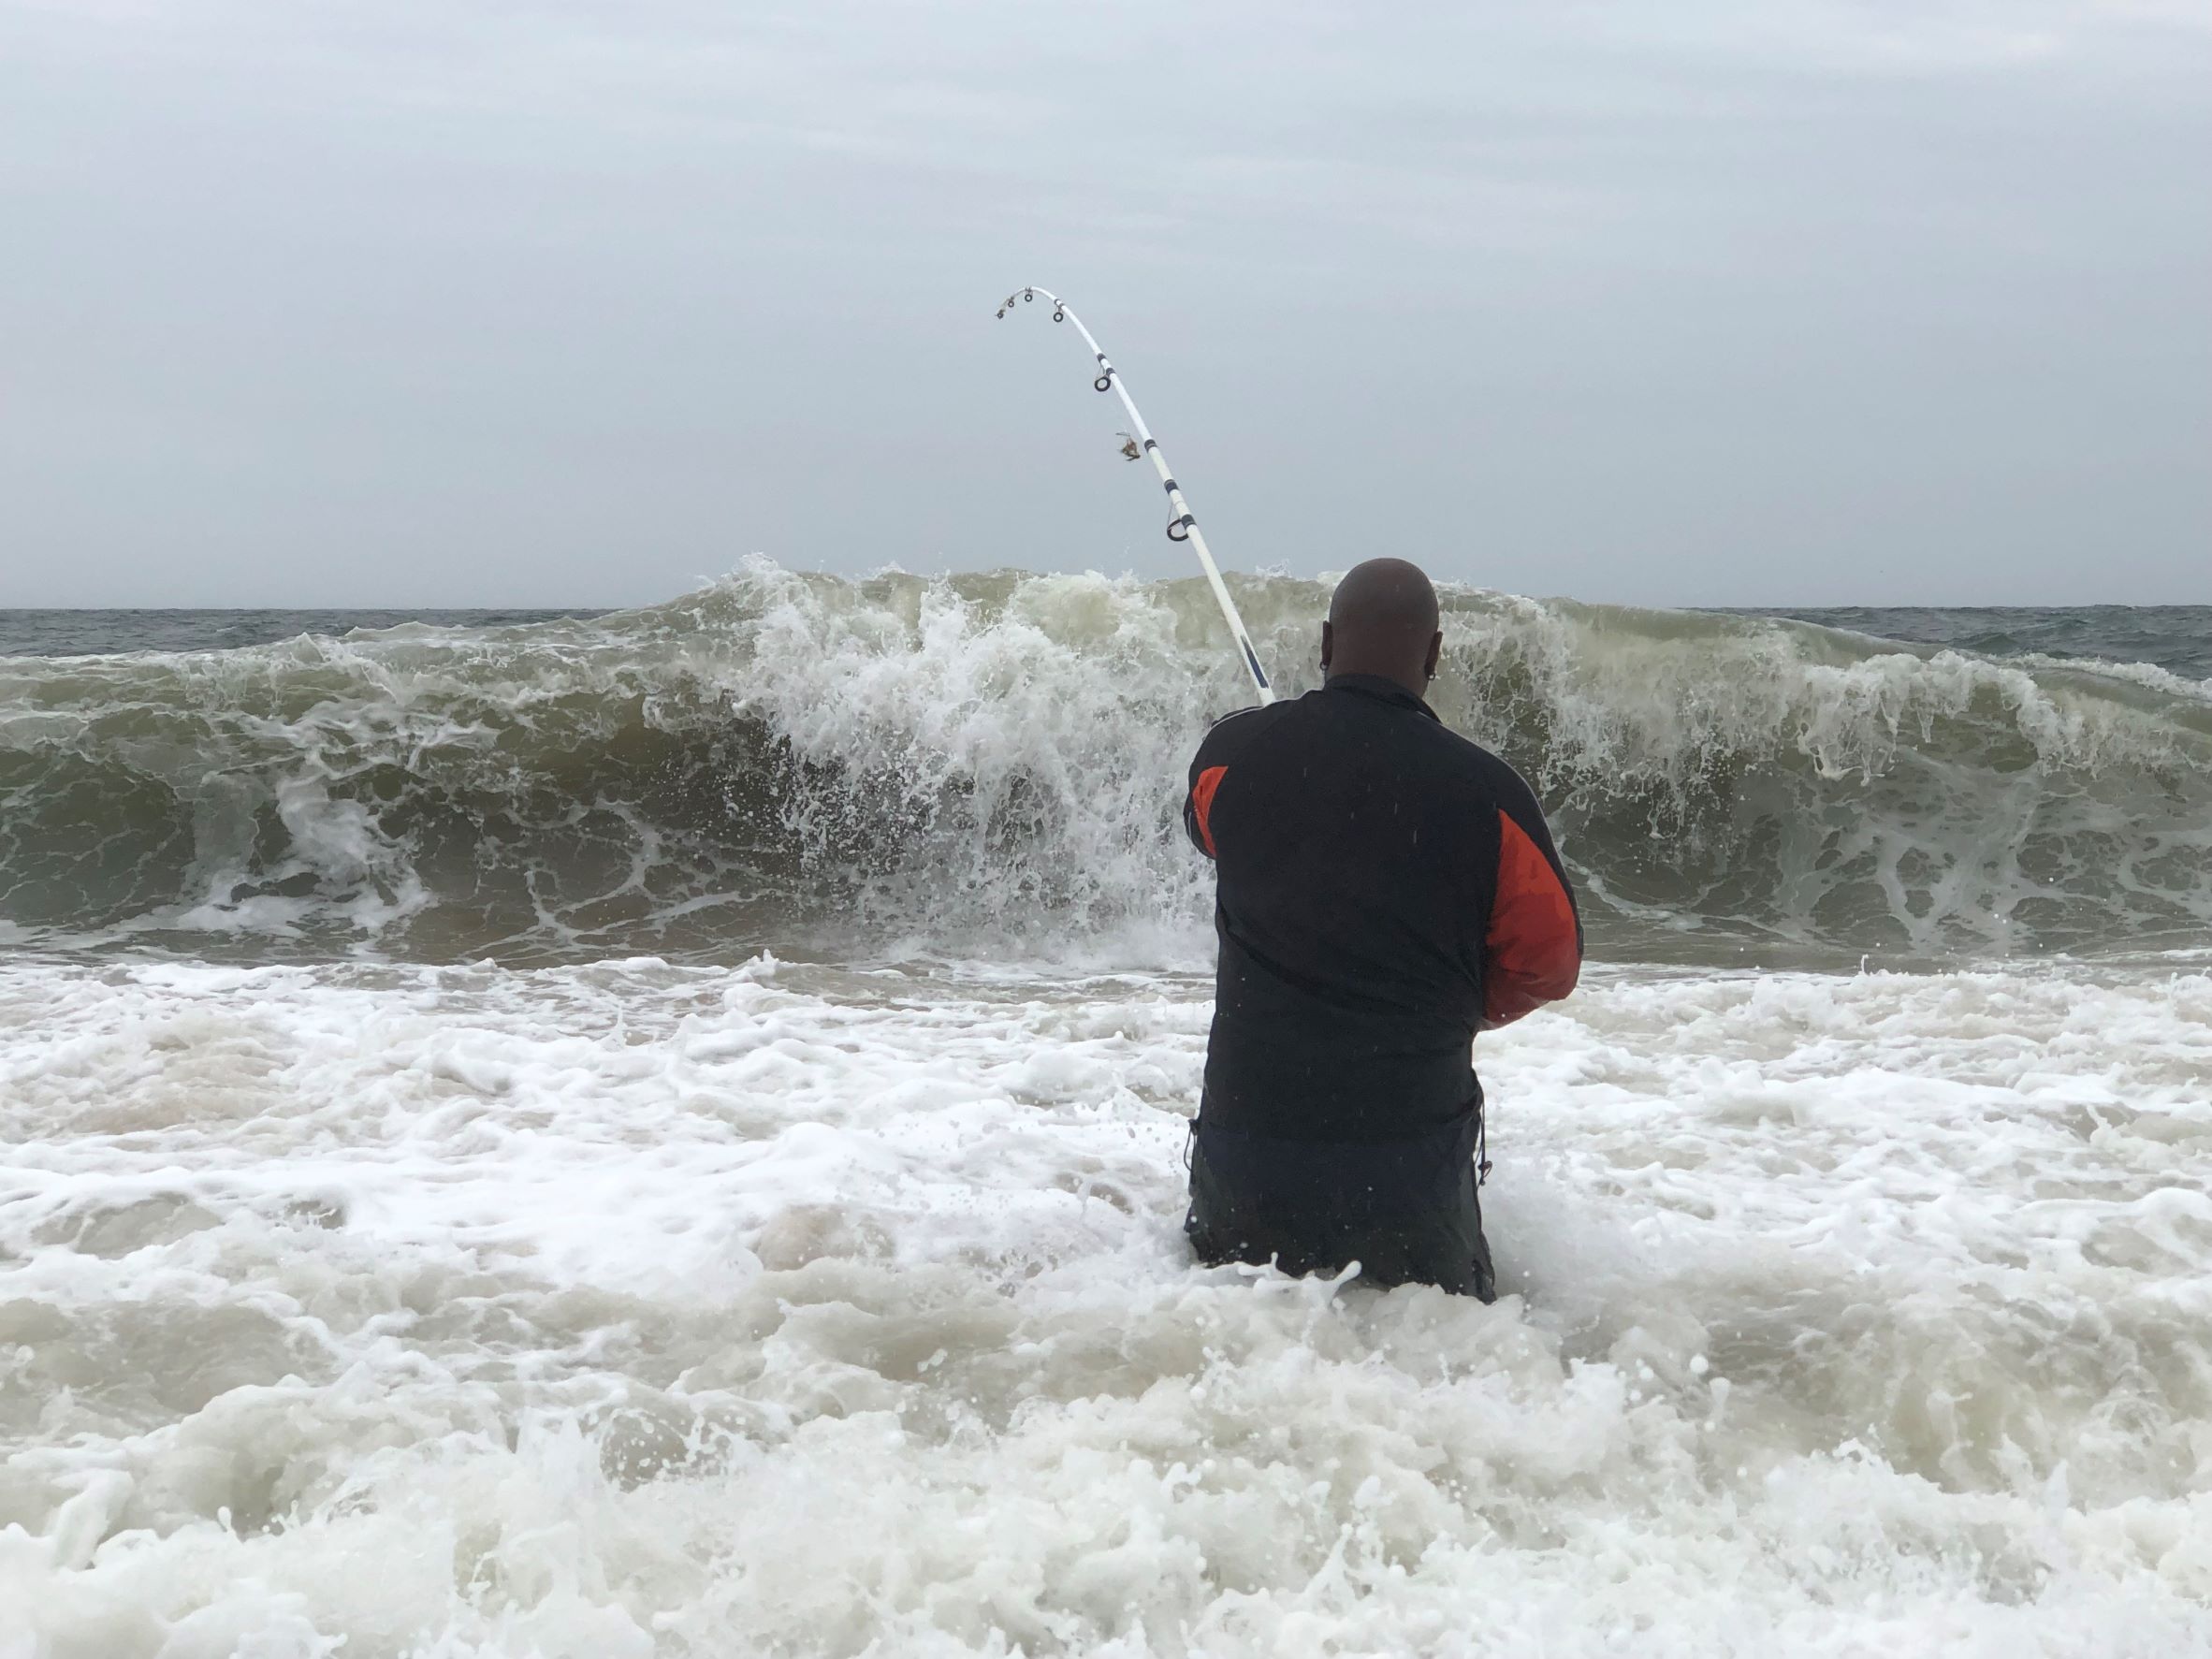 A man stands thigh-deep in ocean water, facing a breaking wave and holding a fishing rod. He appears to be fighting a fish.